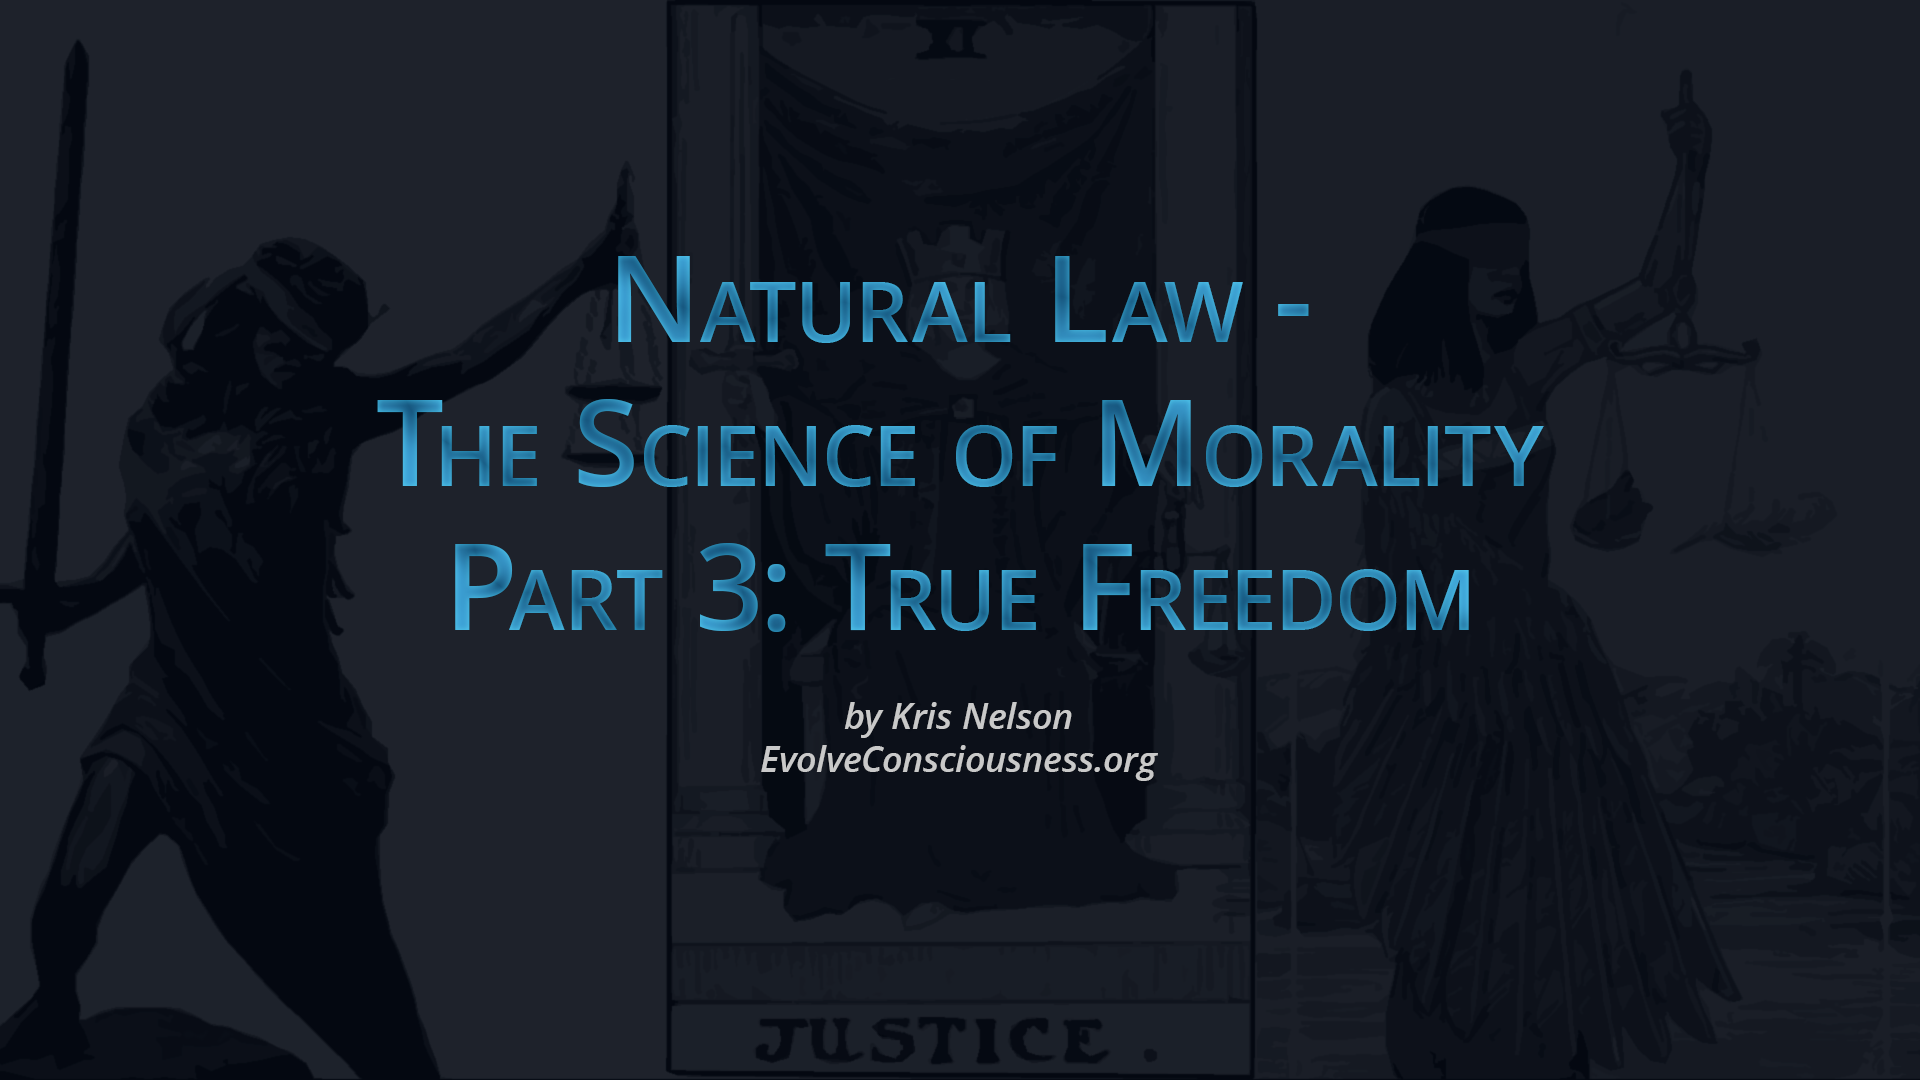 Natural Law - The Science of Morality, Part 3: True Freedom